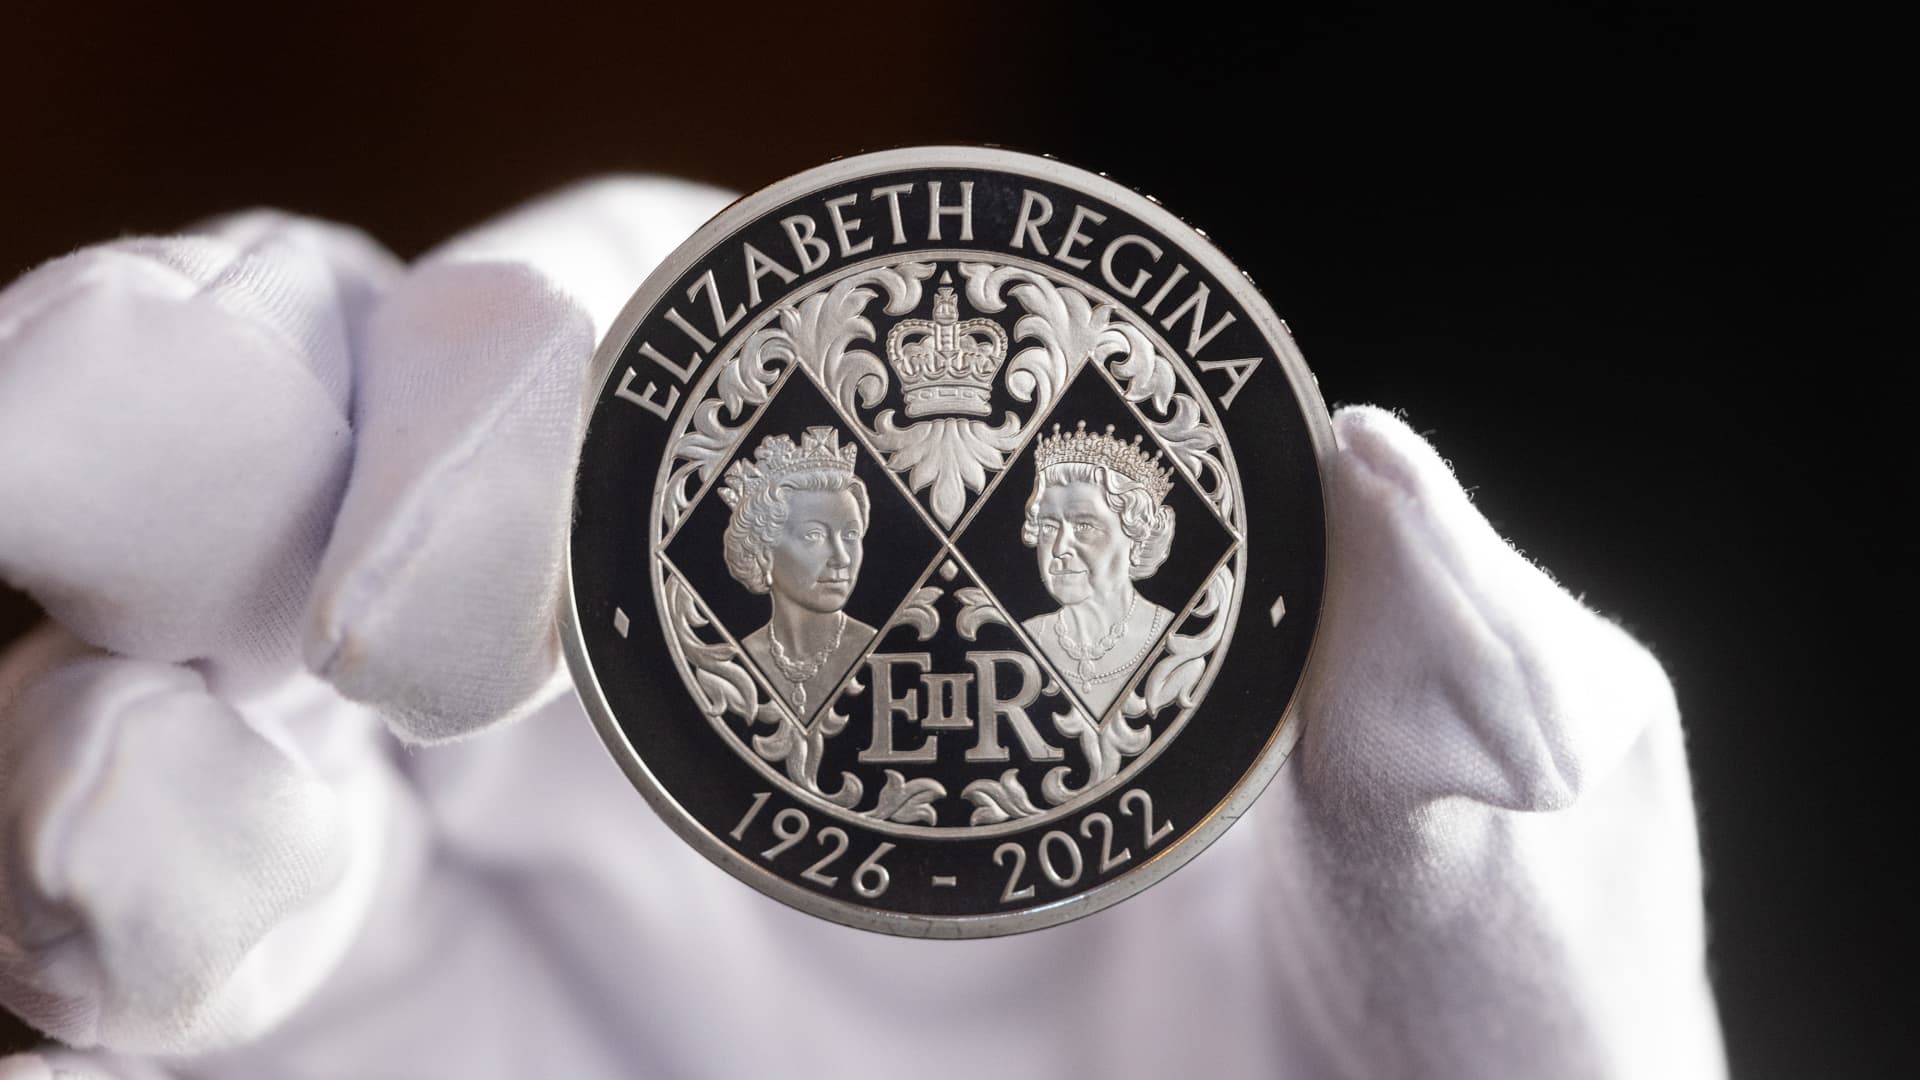 The reverse of a five pound commemorative crown piece coin featuring two portraits of Queen Elizabeth II held by an employee of the Royal Mint.